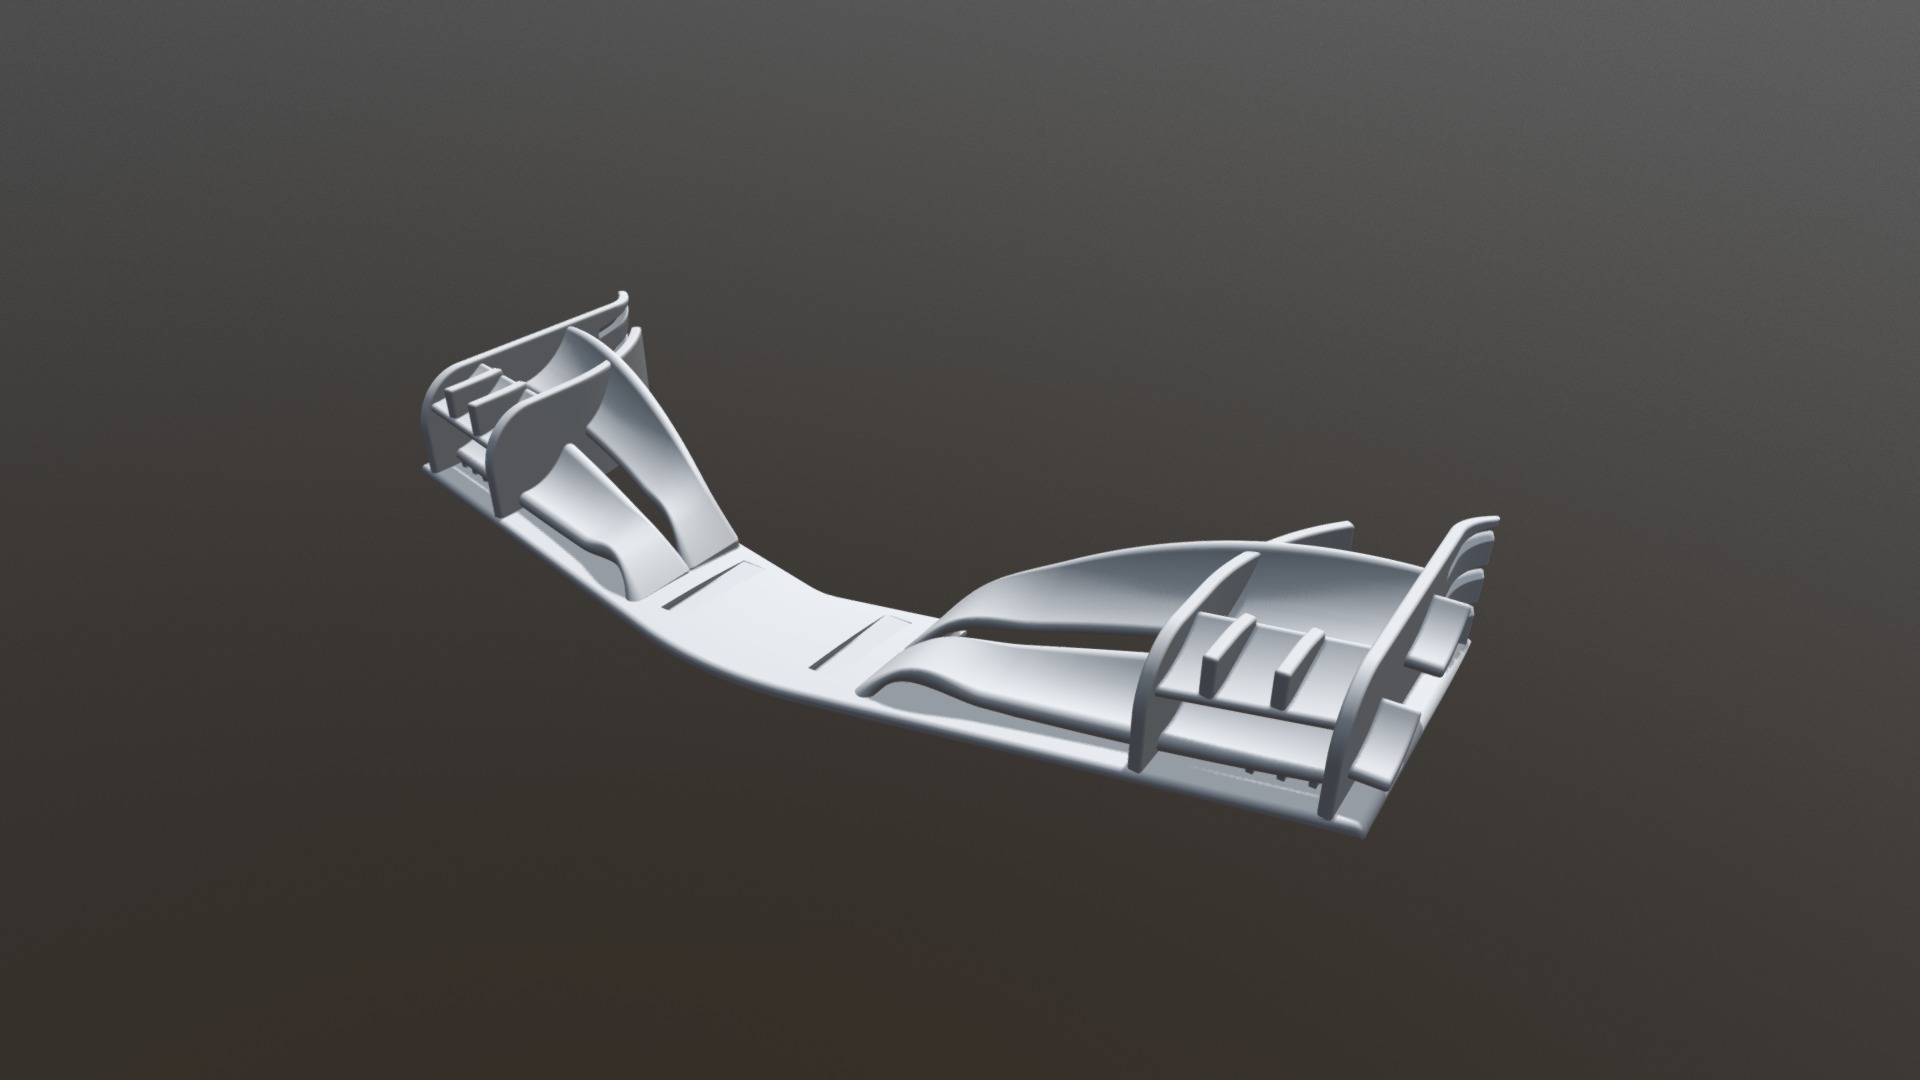 3D model F1 2018 wing - This is a 3D model of the F1 2018 wing. The 3D model is about a logo with a white background.